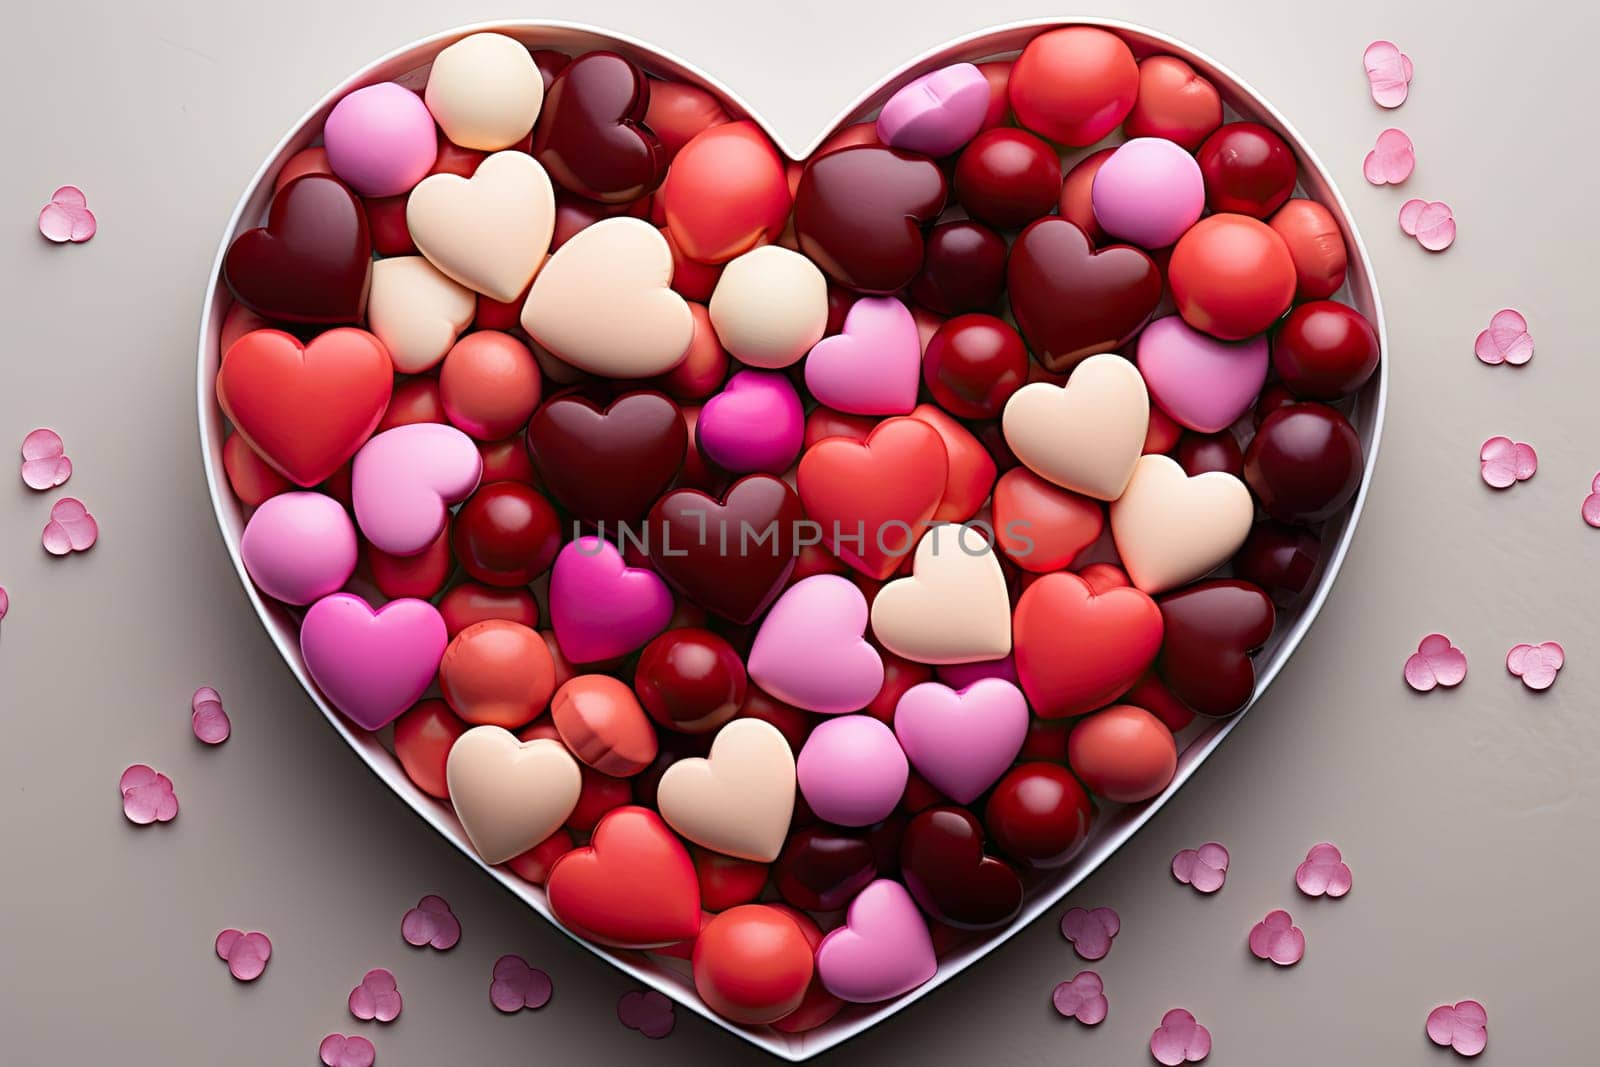 a heart shape filled with red and pink hearts by golibtolibov